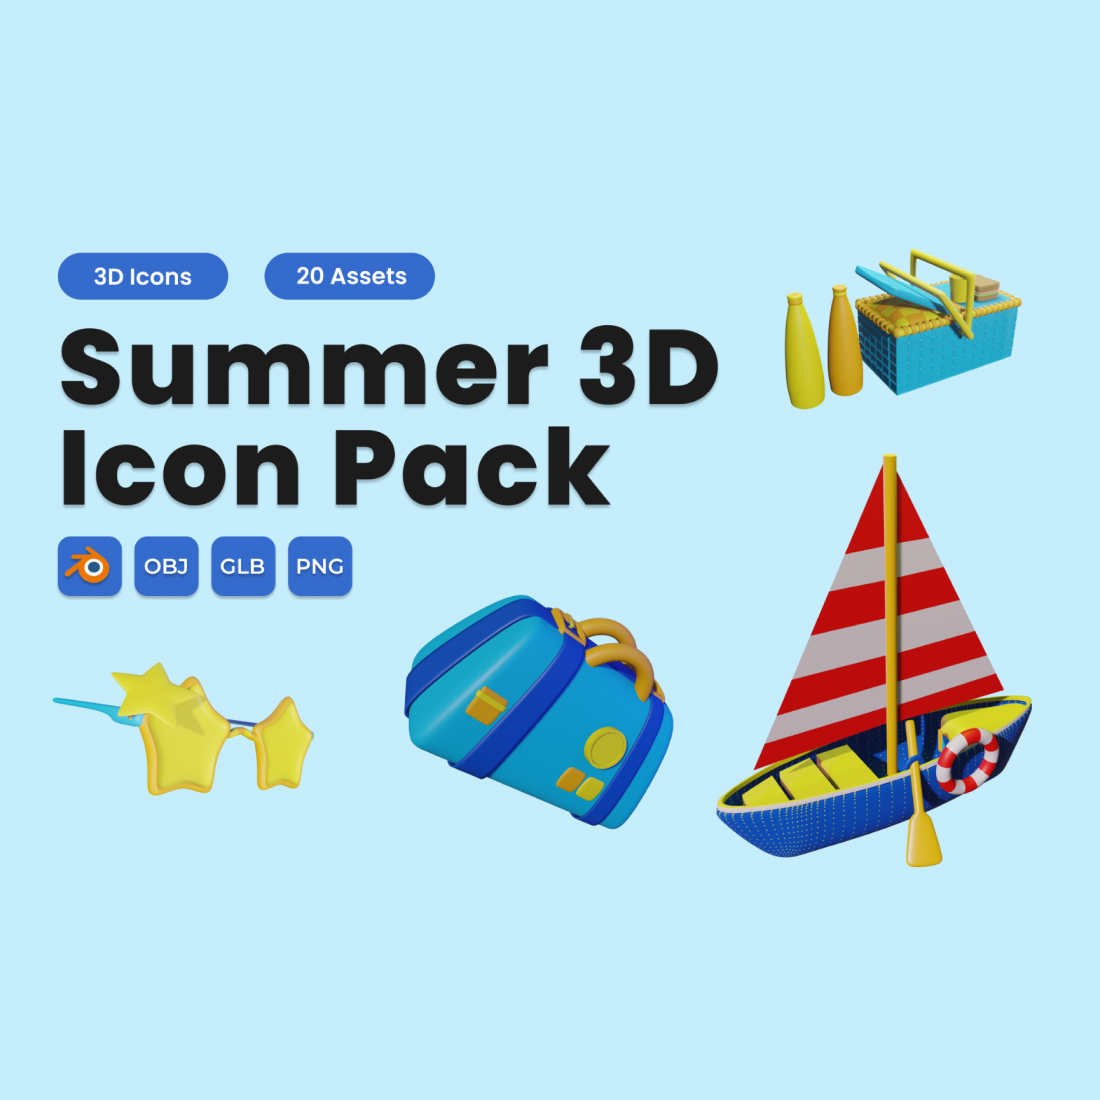 Summer 3D Icon Pack Vol 3 cover image.